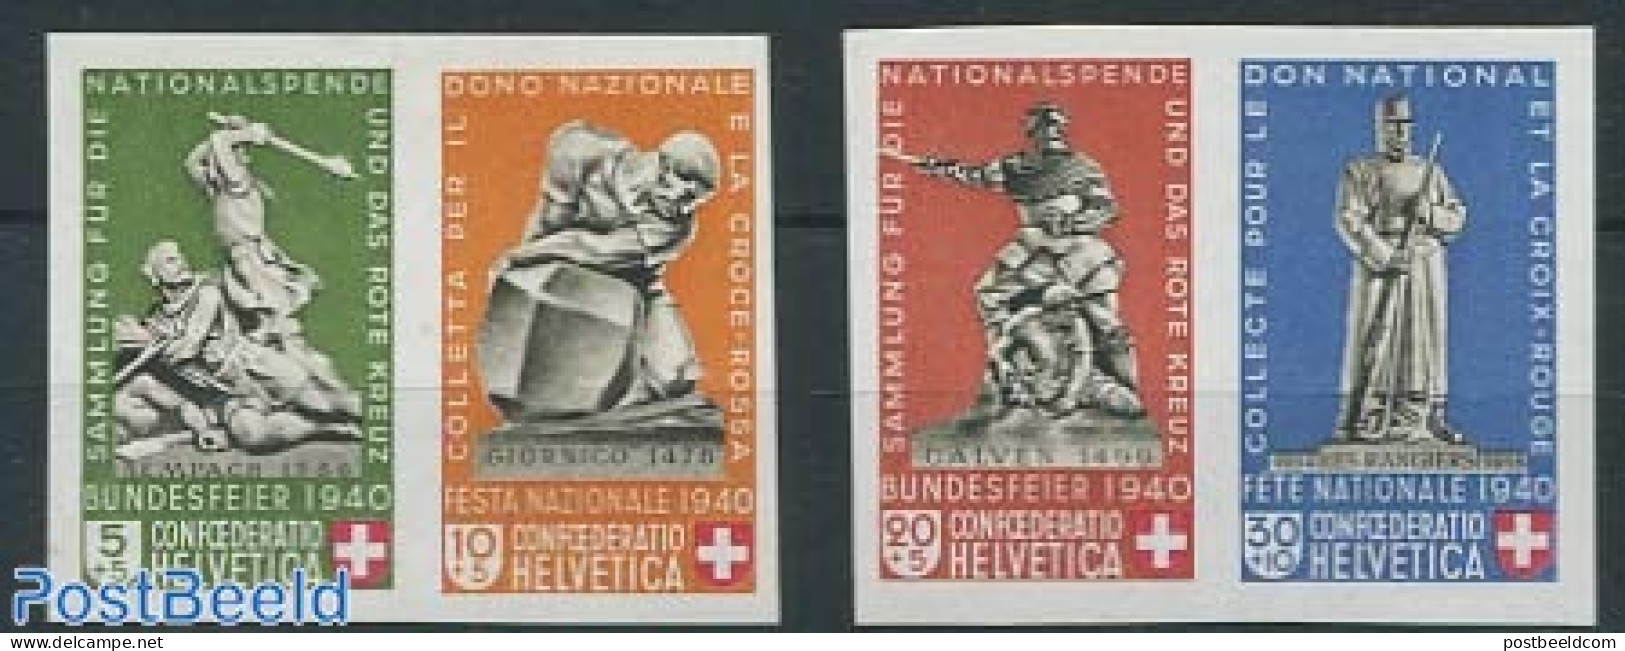 Switzerland 1940 Pro Patria 4v (from S/s), Mint NH, Art - Sculpture - Unused Stamps